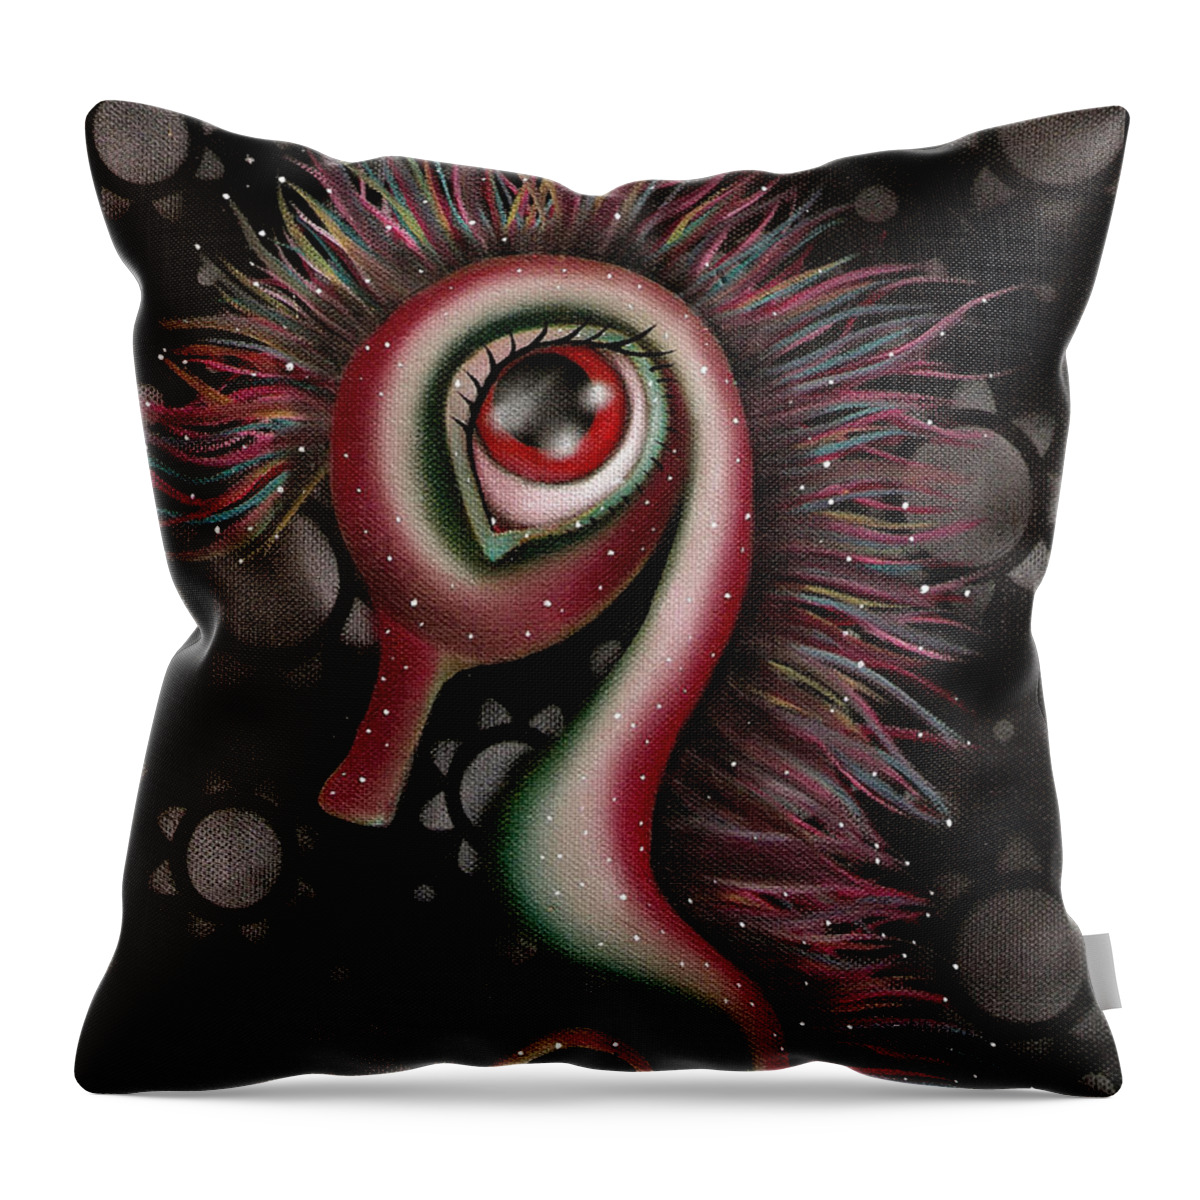 Seahorse Throw Pillow featuring the painting Seahorse by Abril Andrade